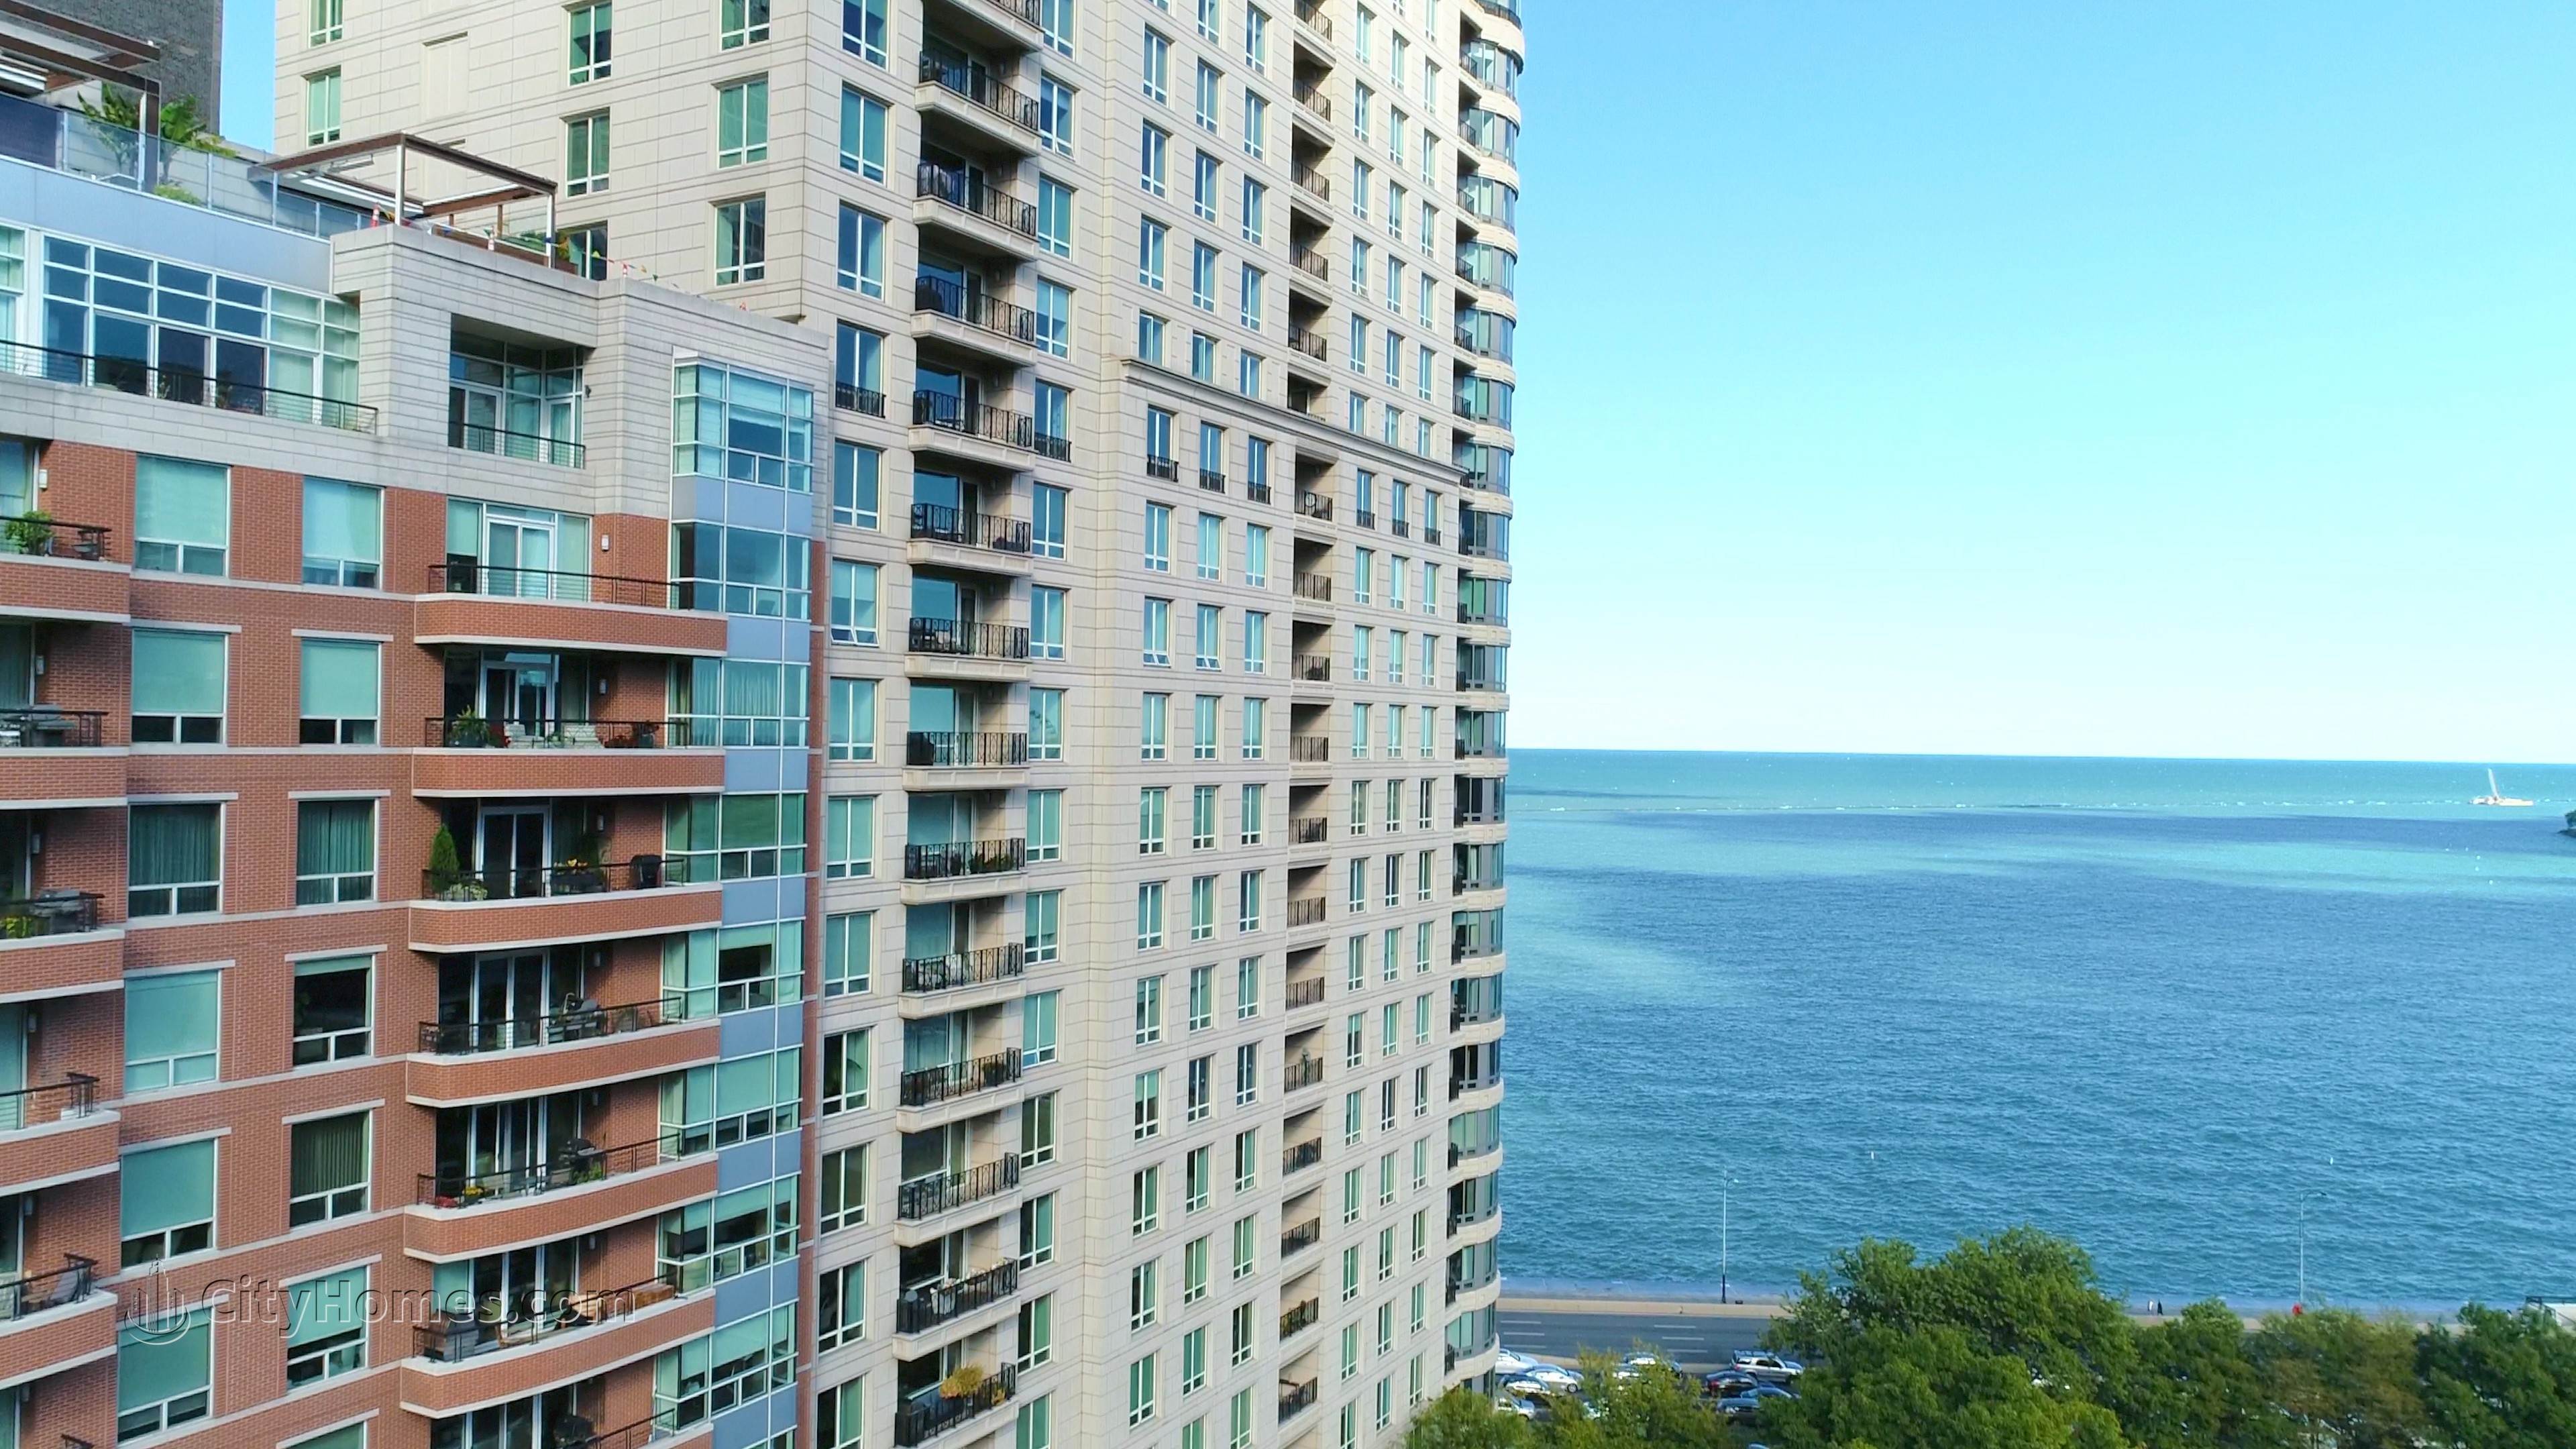 Residences of Lakeshore Park Gebäude bei 840 N Lake Shore Dr, Central Chicago, Chicago, IL 60611